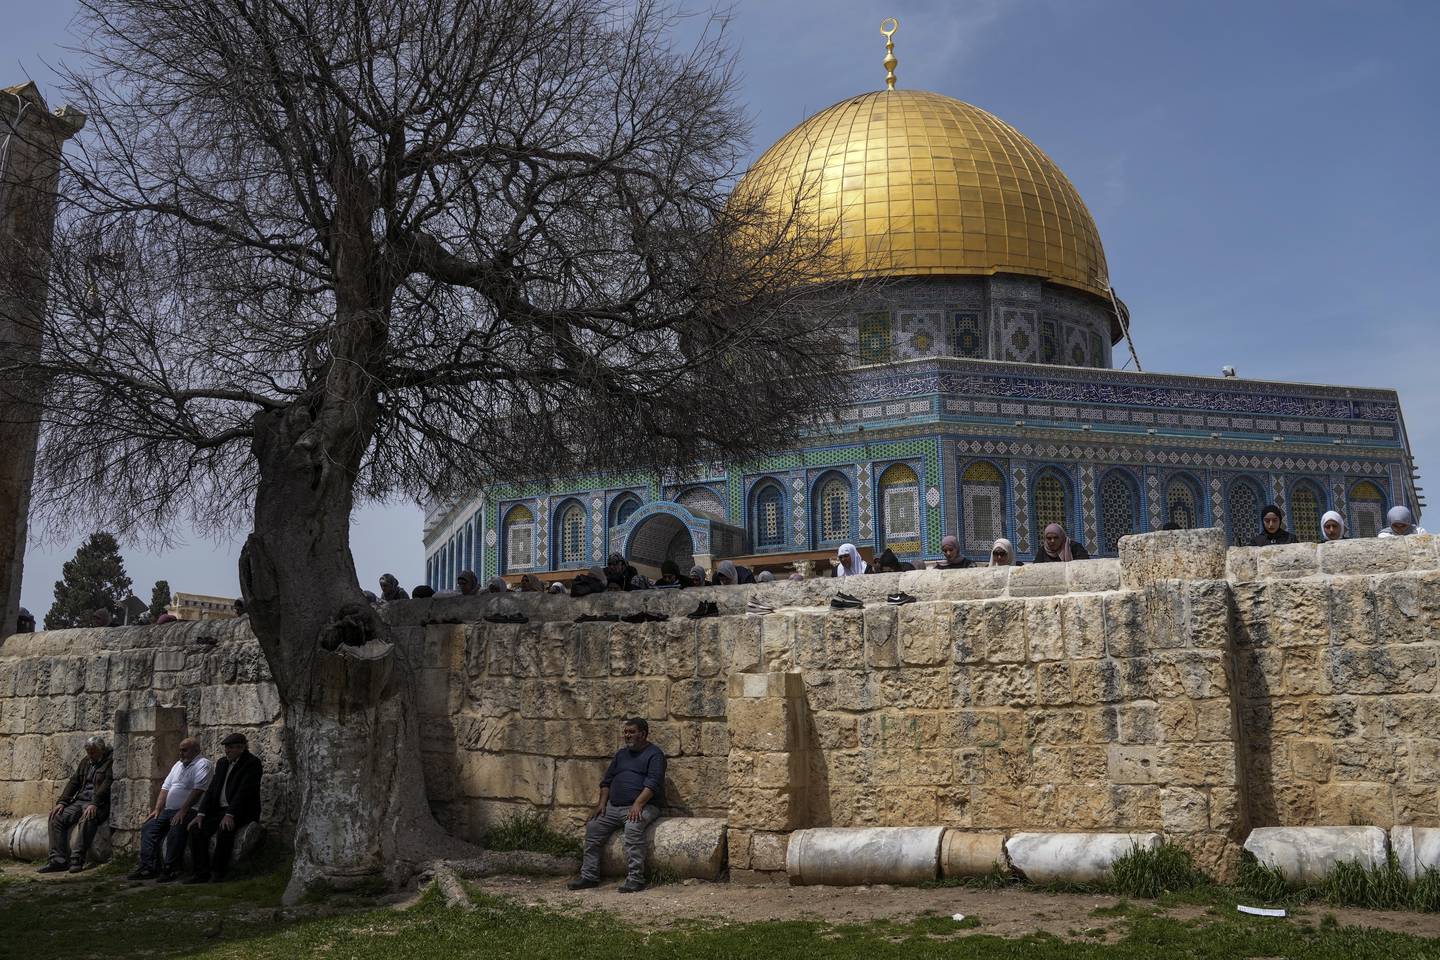 Muslim worshippers gather for Friday prayers next to the Dome of the Rock Mosque in the Al Aqsa Mosque compound in Jerusalem's old city.  AP Photo